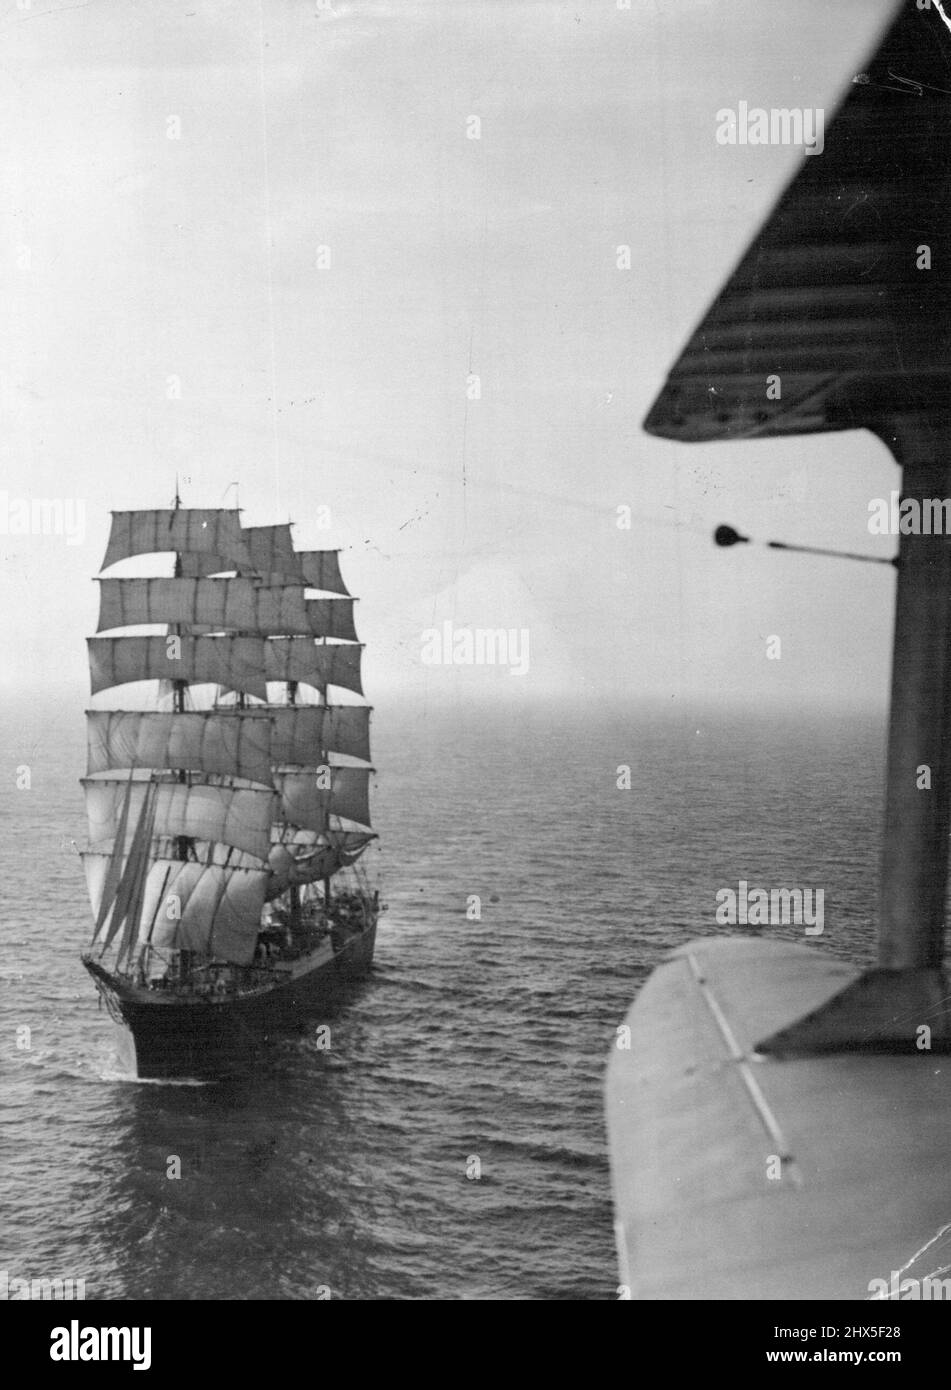 The Ancient and Modern With her white sails shining in the gleam of a wintry sun. The dour-masted 3,200-tons barque 'Pamir' made a perfect picture for our aerial photographer as she travelled up the English Channel at midday, December 21 - 79 day after leaving Wellington, New Zealand, 13,000 miles away. Included in her cargo of wools and tallow is a consignment of 64 cases of 'Patriotic' Christmas gifts - clothing. A 19th century barque, of the type which, made its precarious voyage under the captaincy of a careless drunkard. November 5, 1952. (Photo by Associated Press Photo) Stock Photo